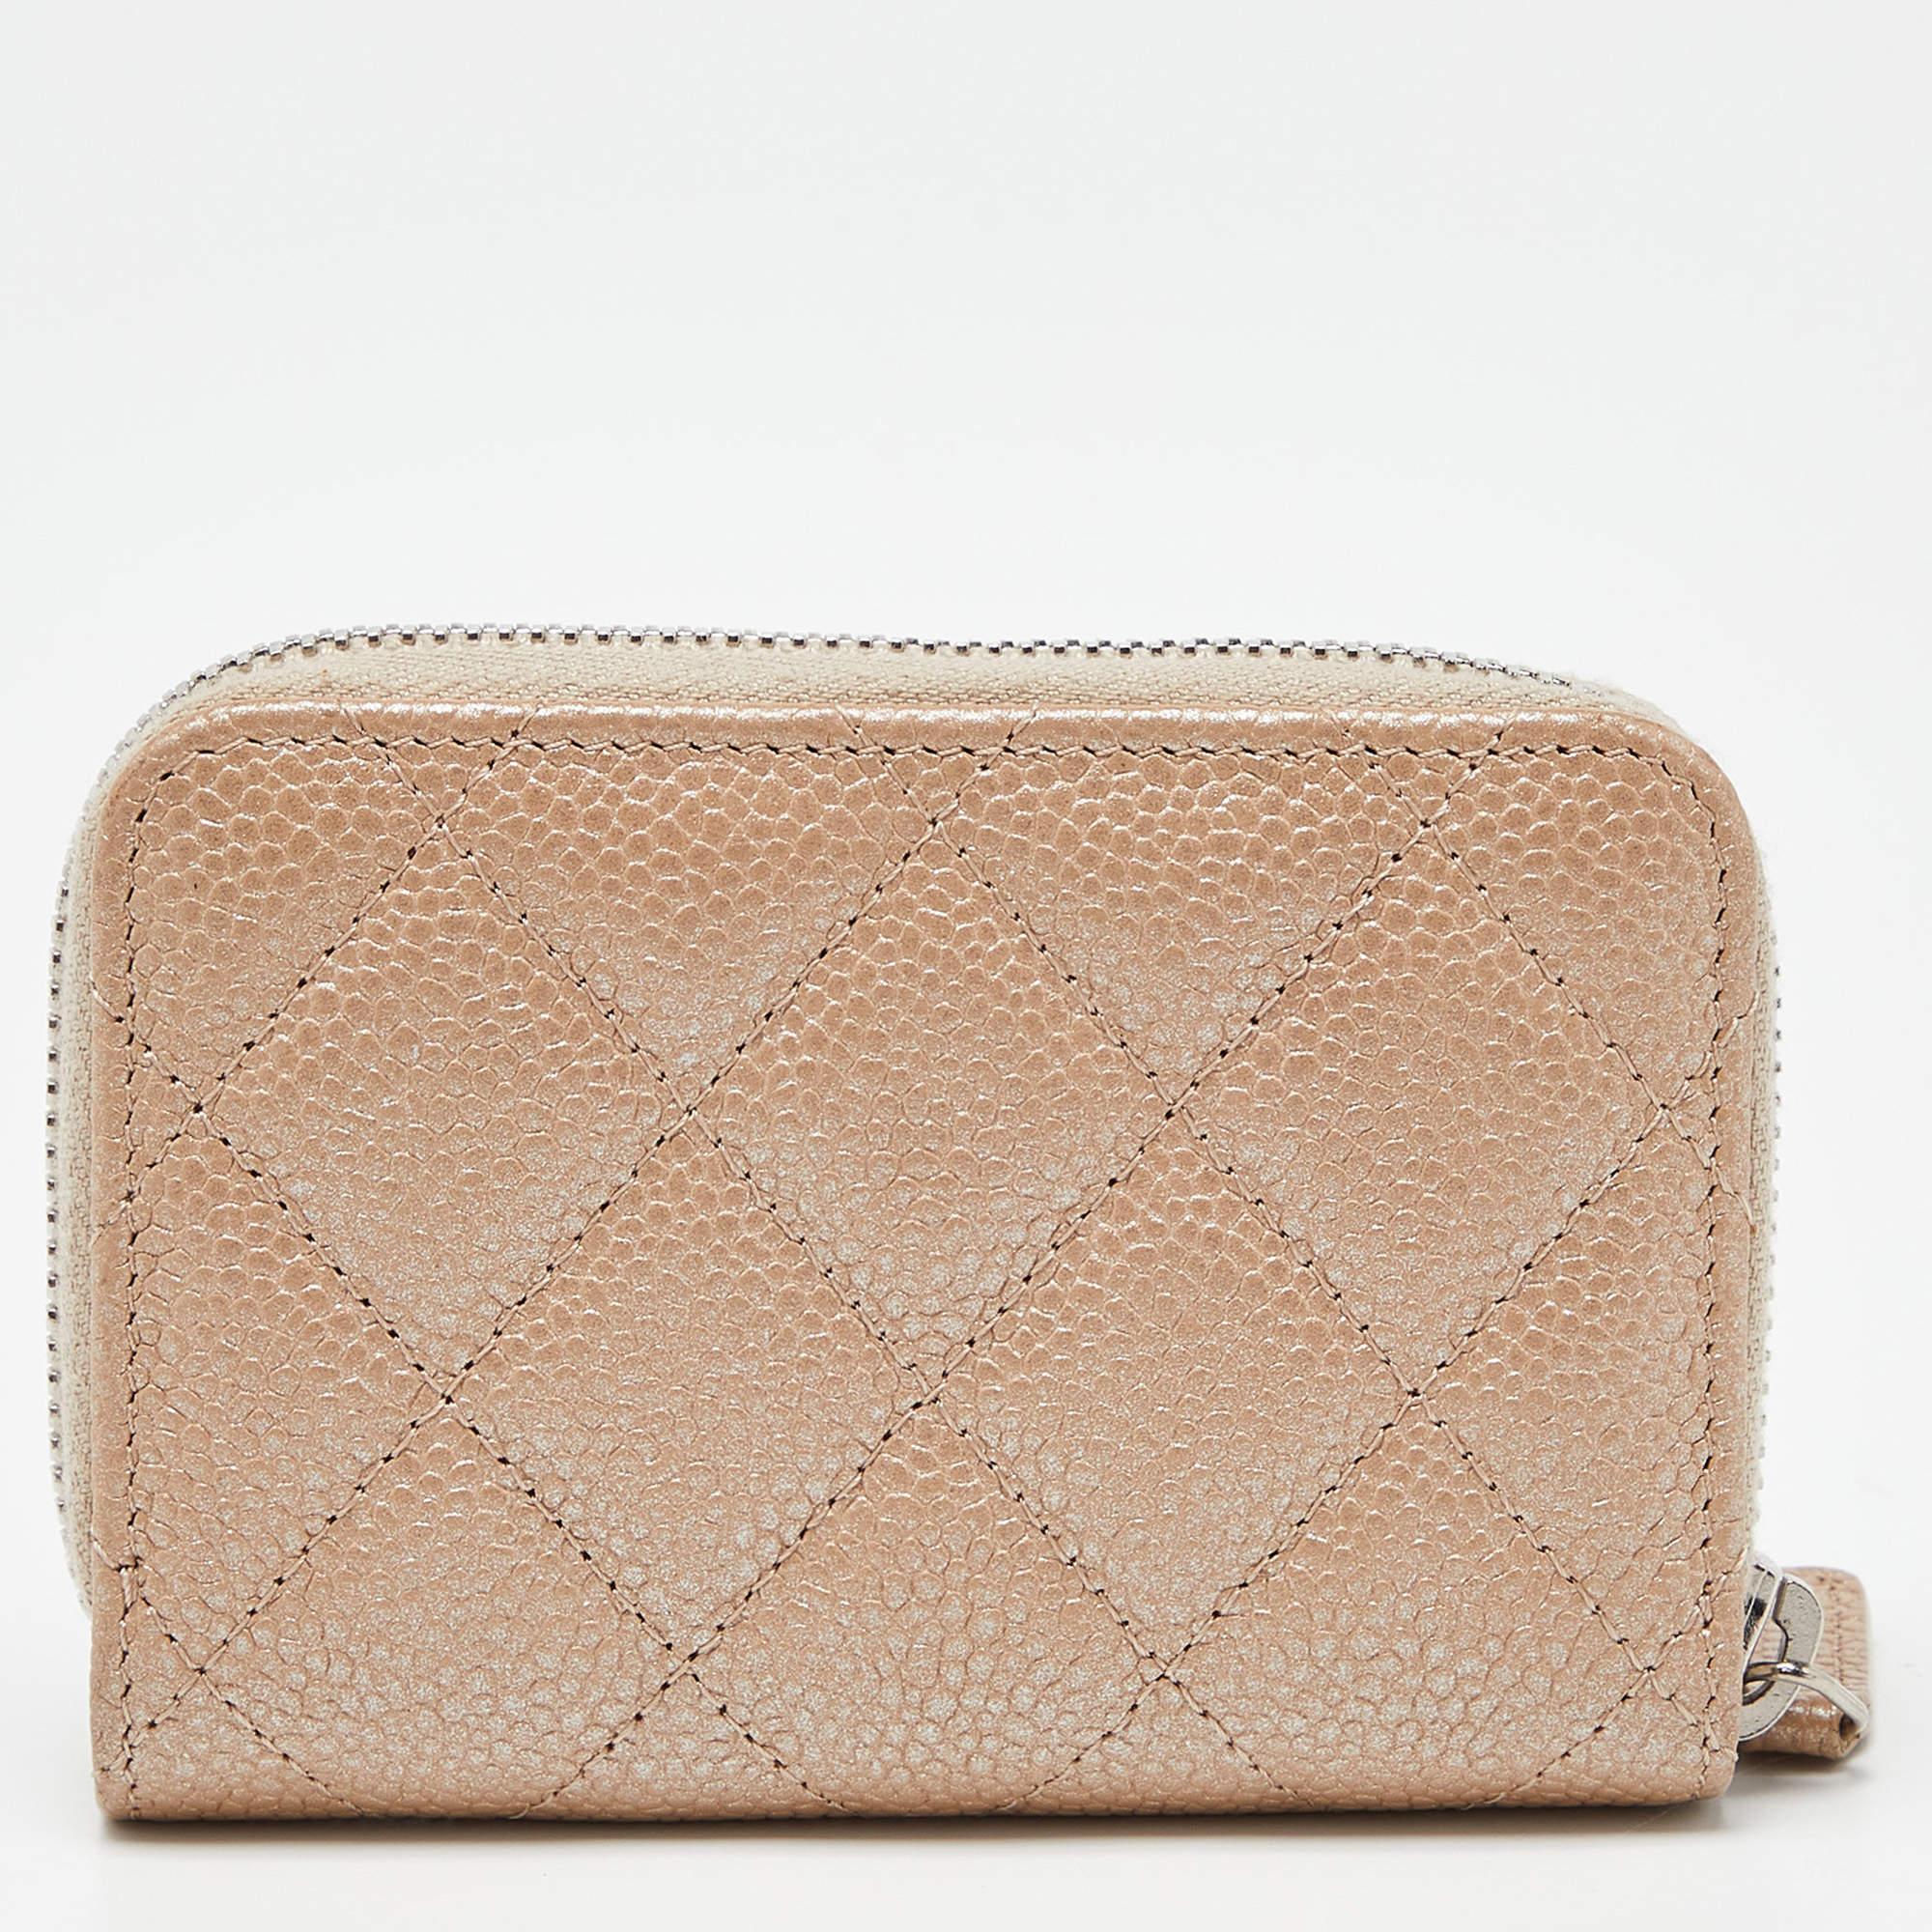 This Chanel coin purse is conveniently designed for everyday use. Crafted from beige Caviar leather, it has a zip closure that opens to reveal lined compartments and slots for you to neatly arrange your things.

Includes: Original Dustbag, Original